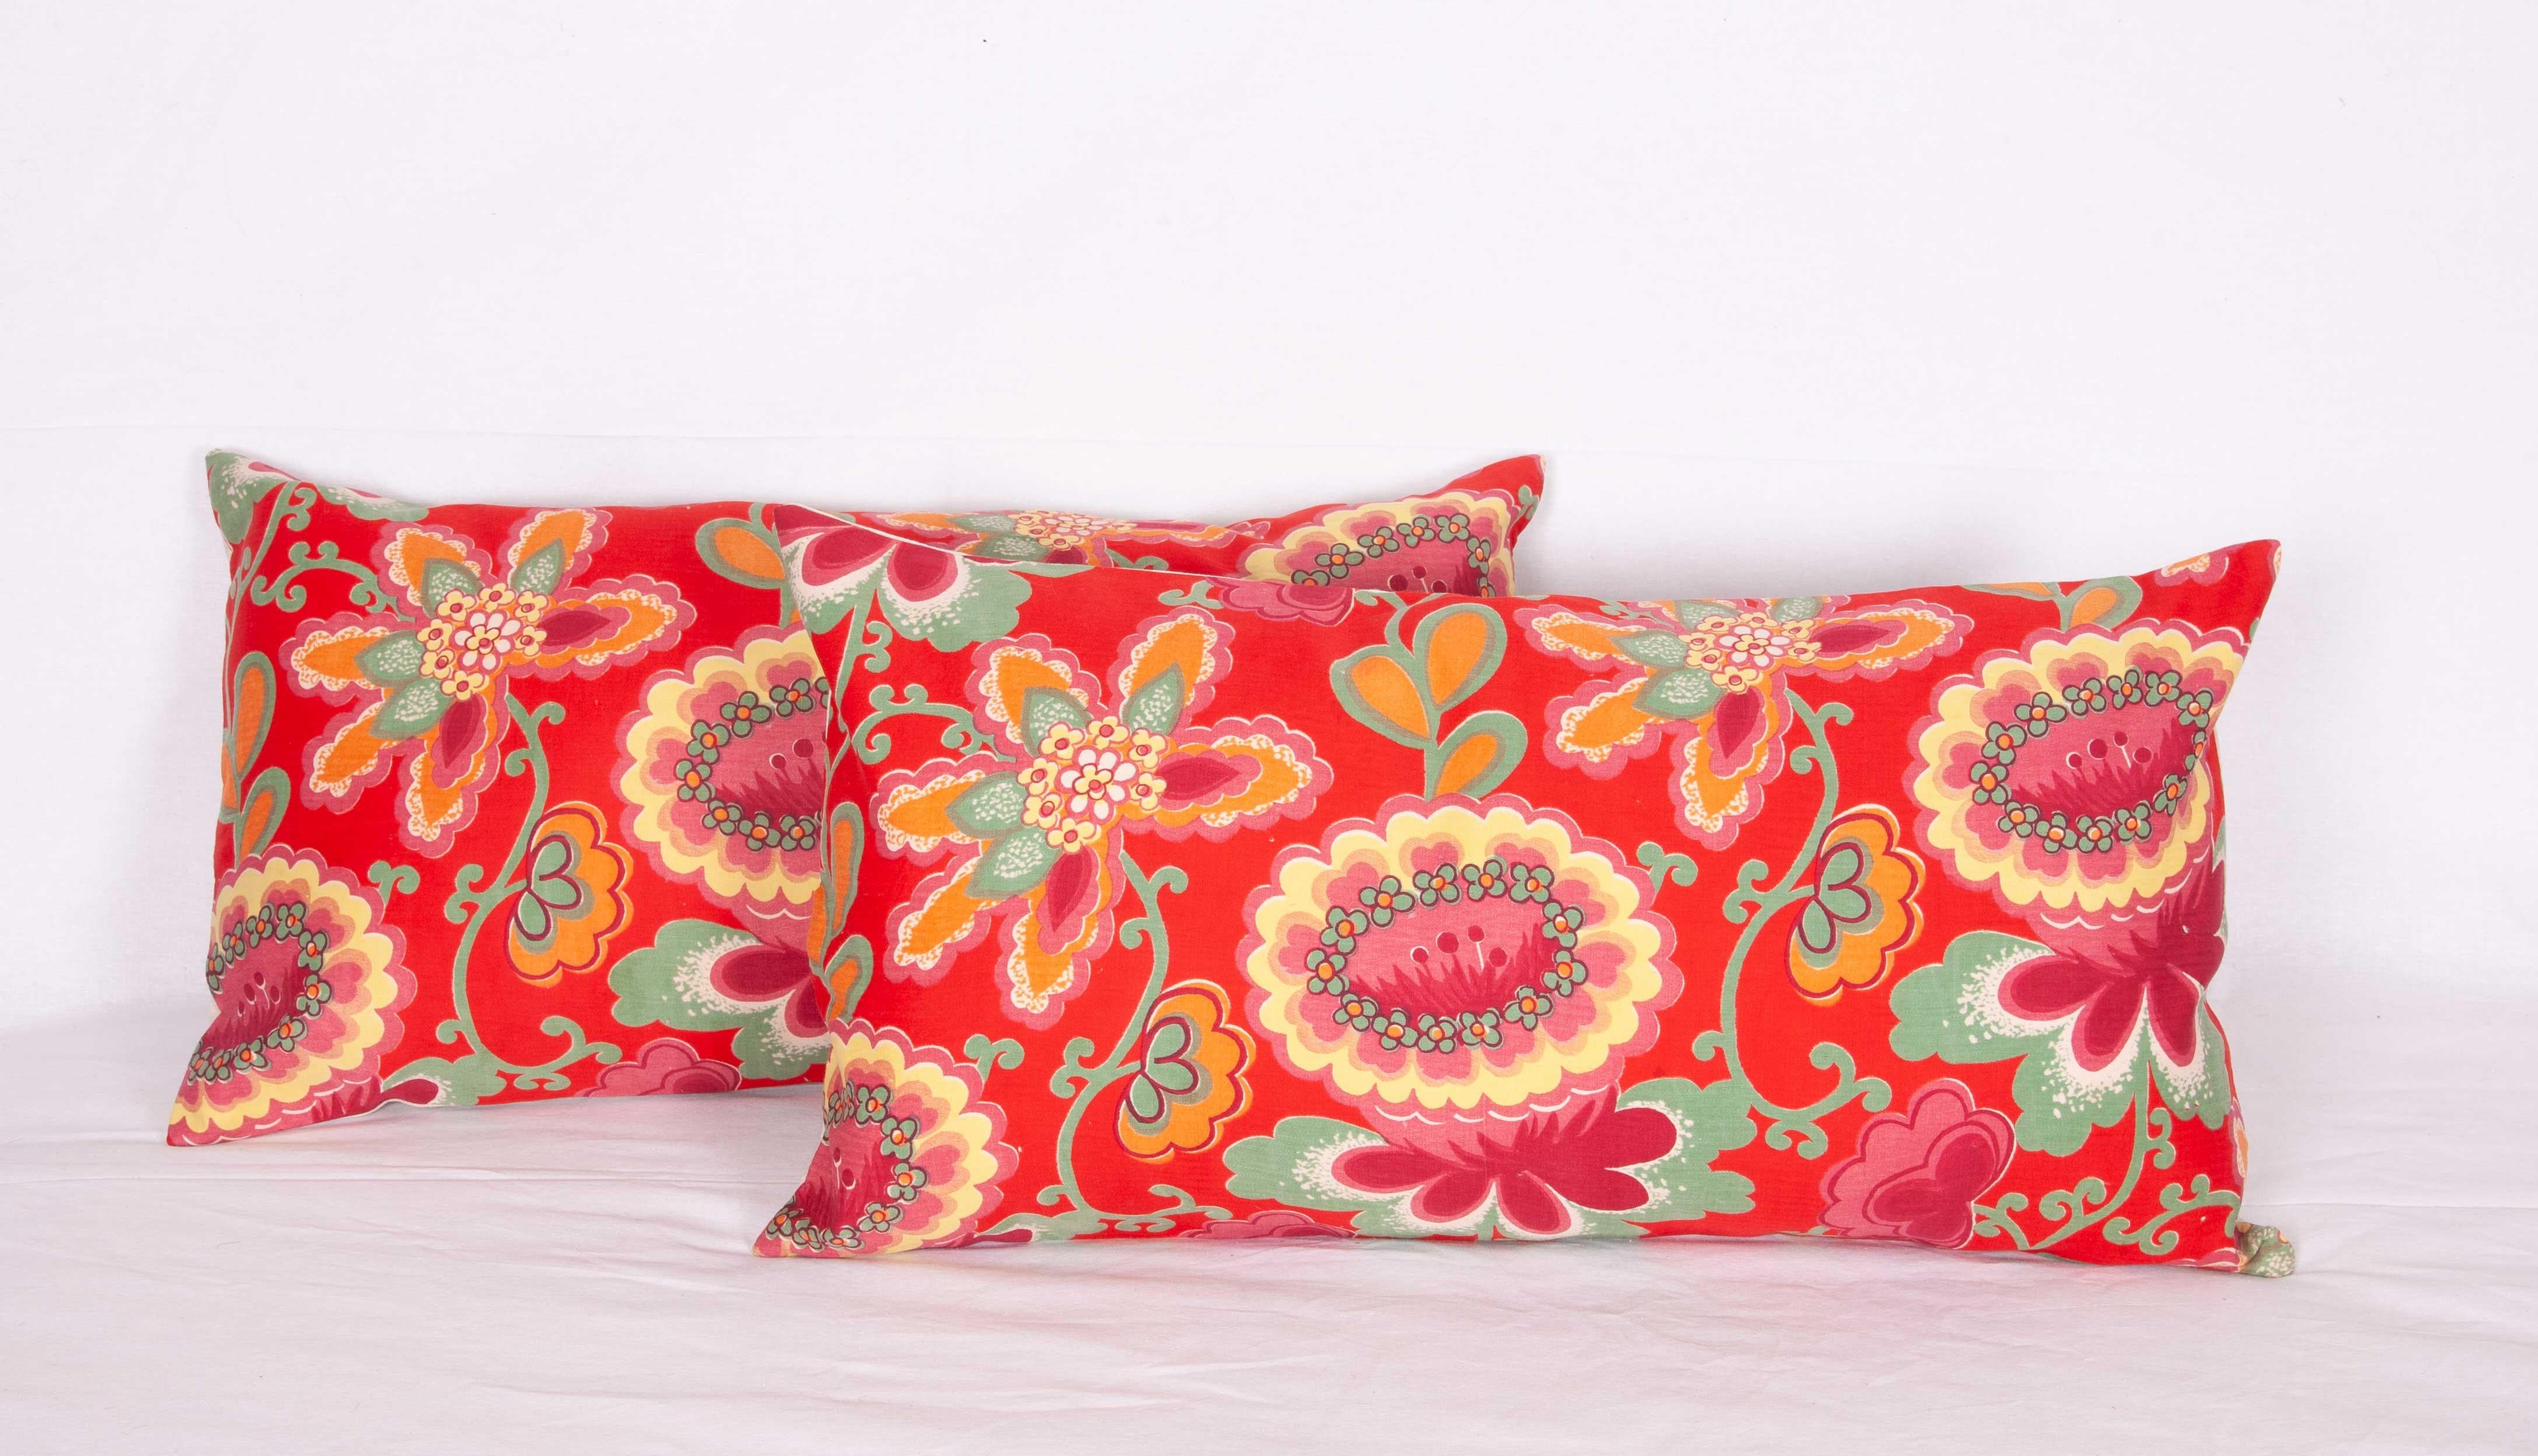 Woven Pillow Cases Fashioned from Mid-20th Century Russian Printed Cotton